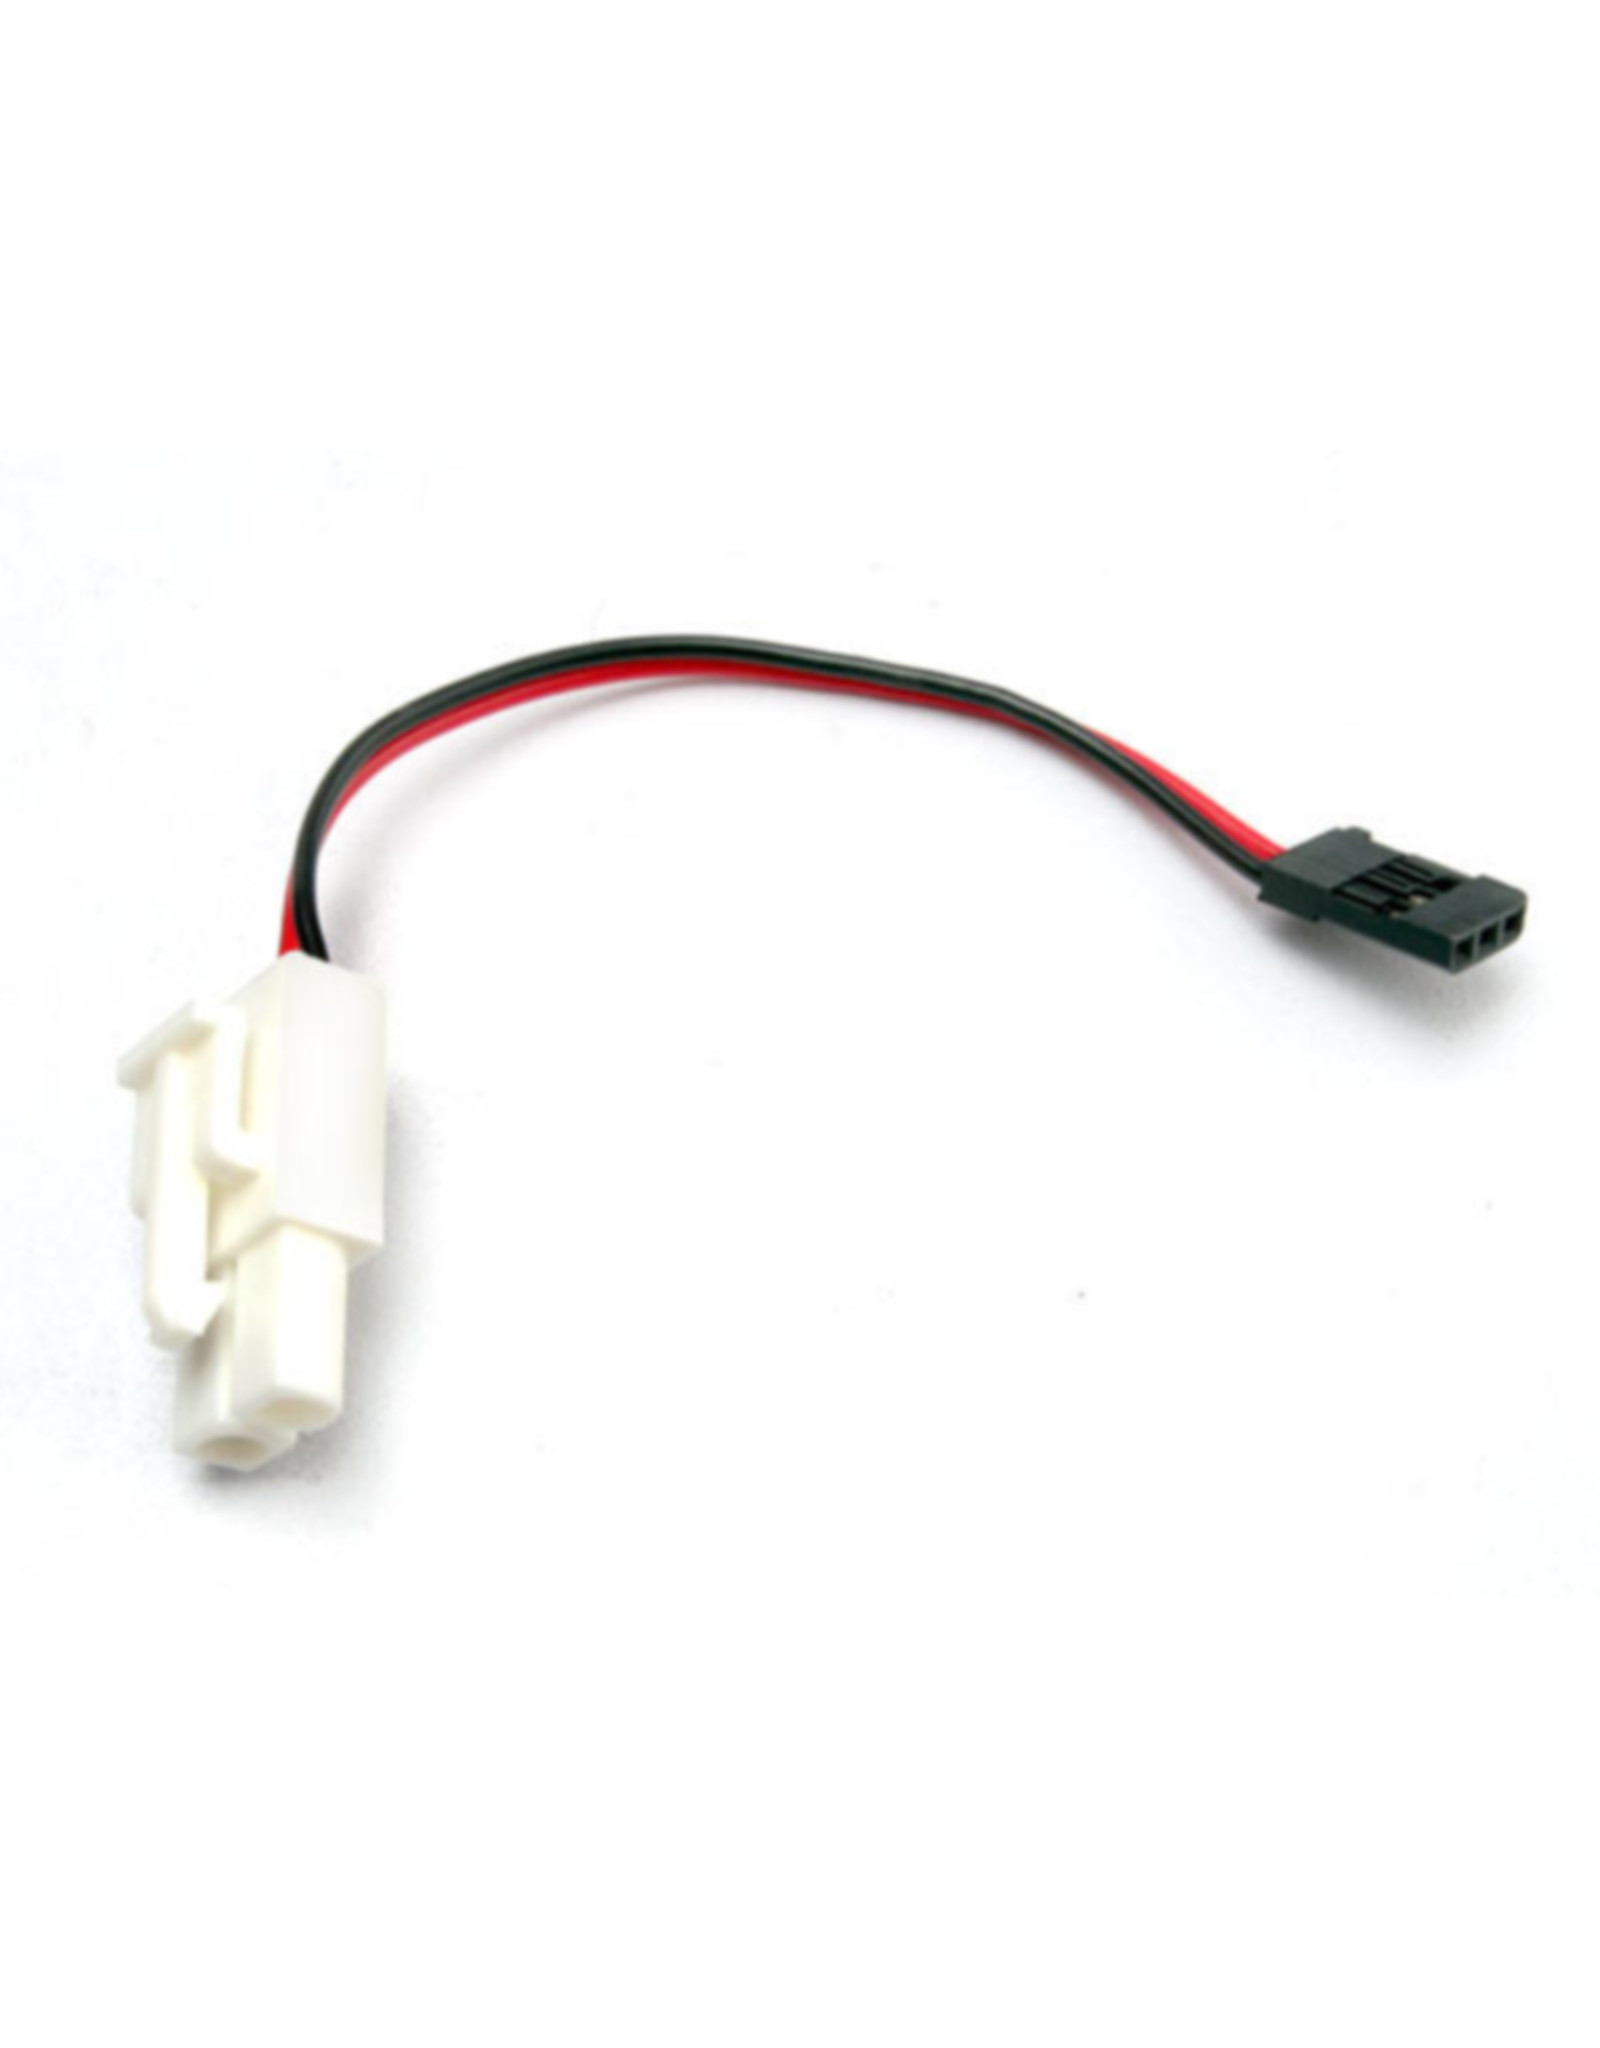 Traxxas TRA3029 Plug Adapter for TRX Power Charger